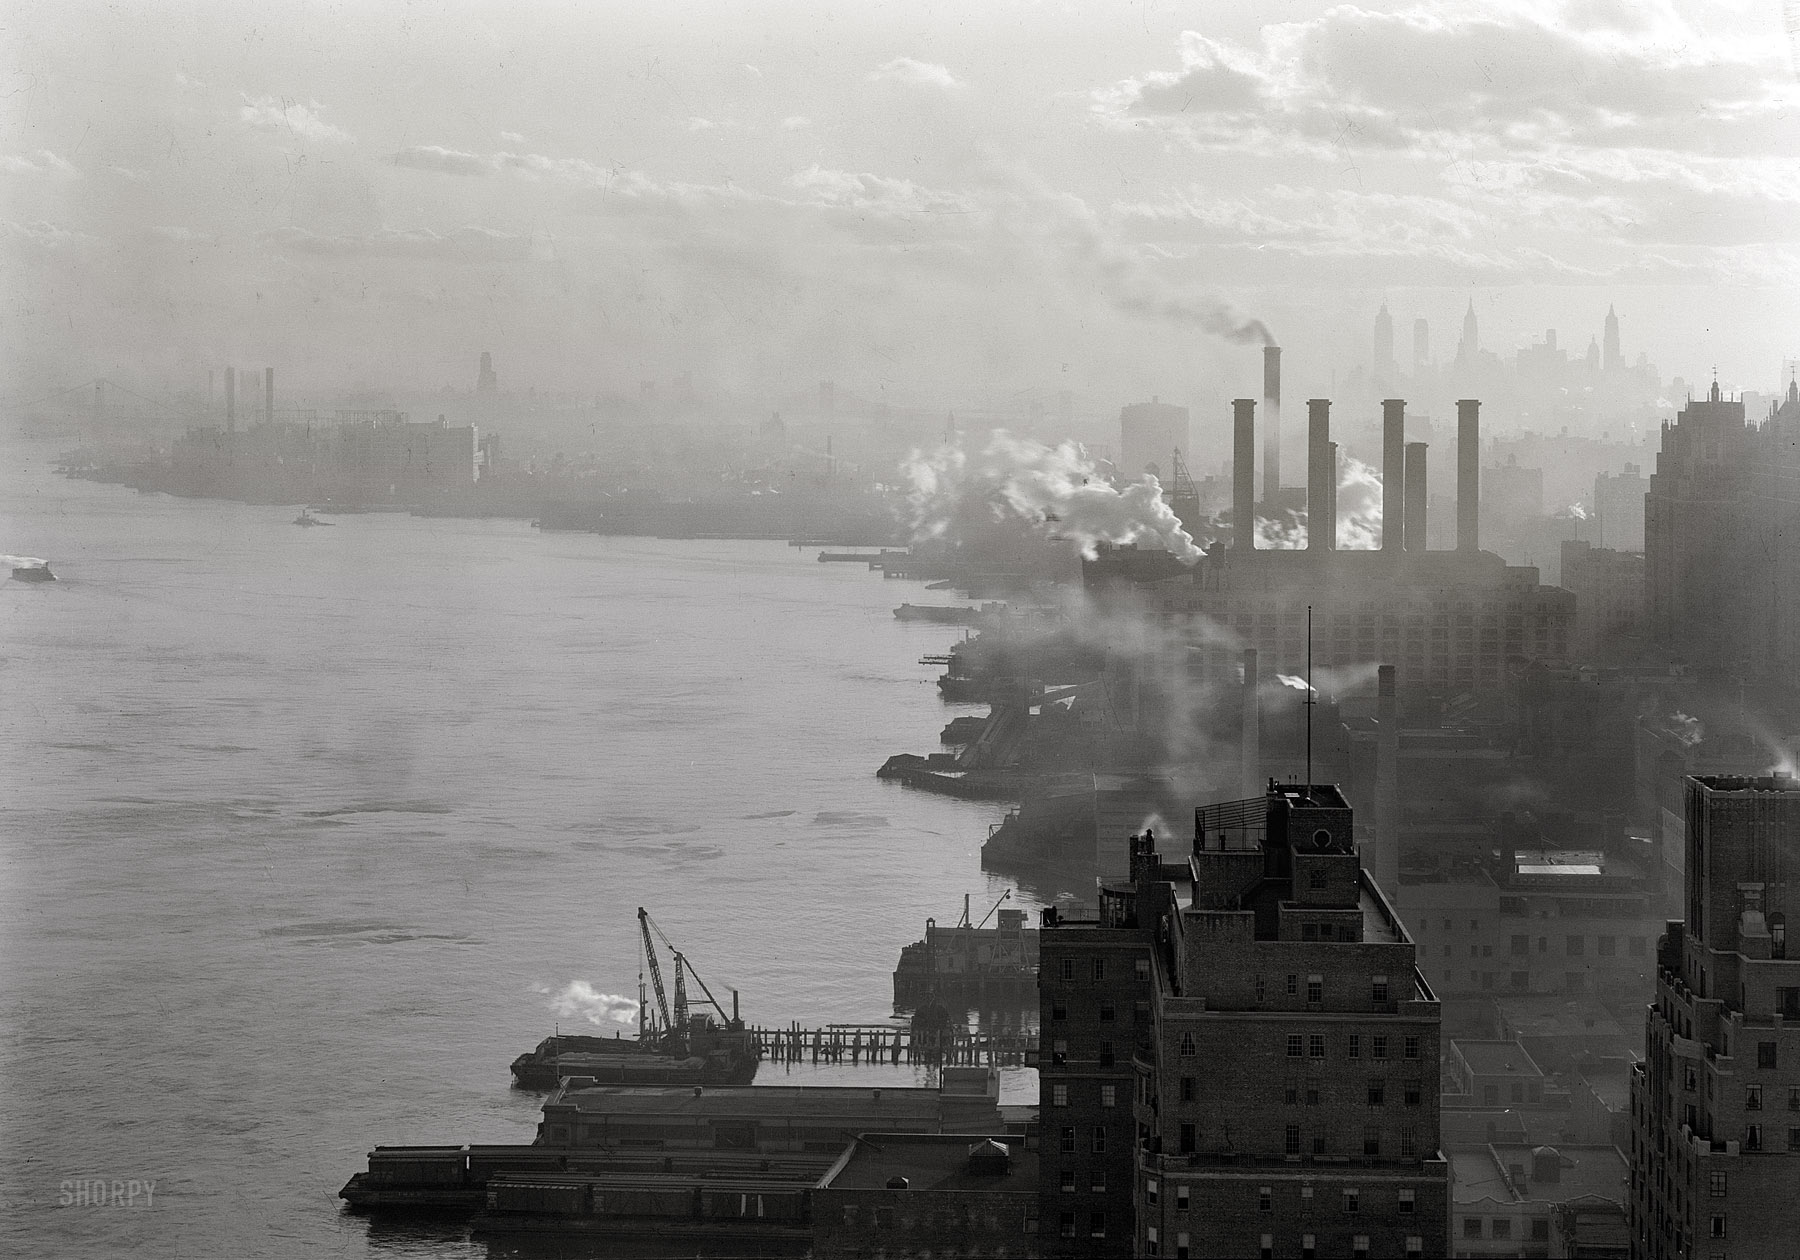 December 15, 1931. New York. "River House, 52nd Street and East River. View of power house." 5x7 safety negative by Gottscho-Schleisner. View full size.